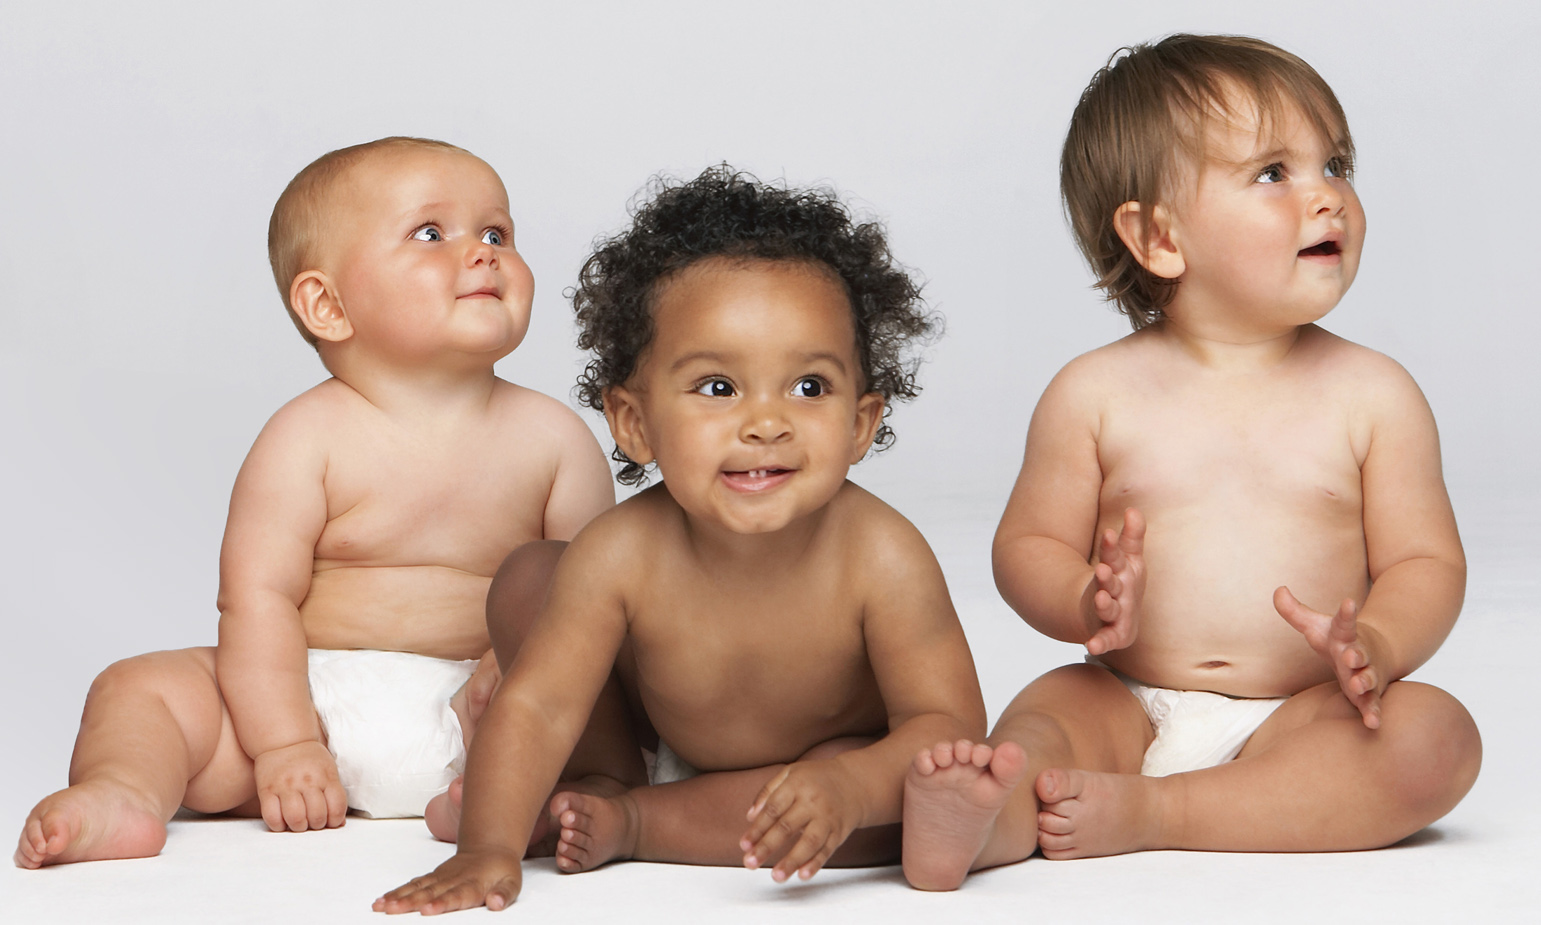 Three animated, diaper-wearing infants sit together against seamless background